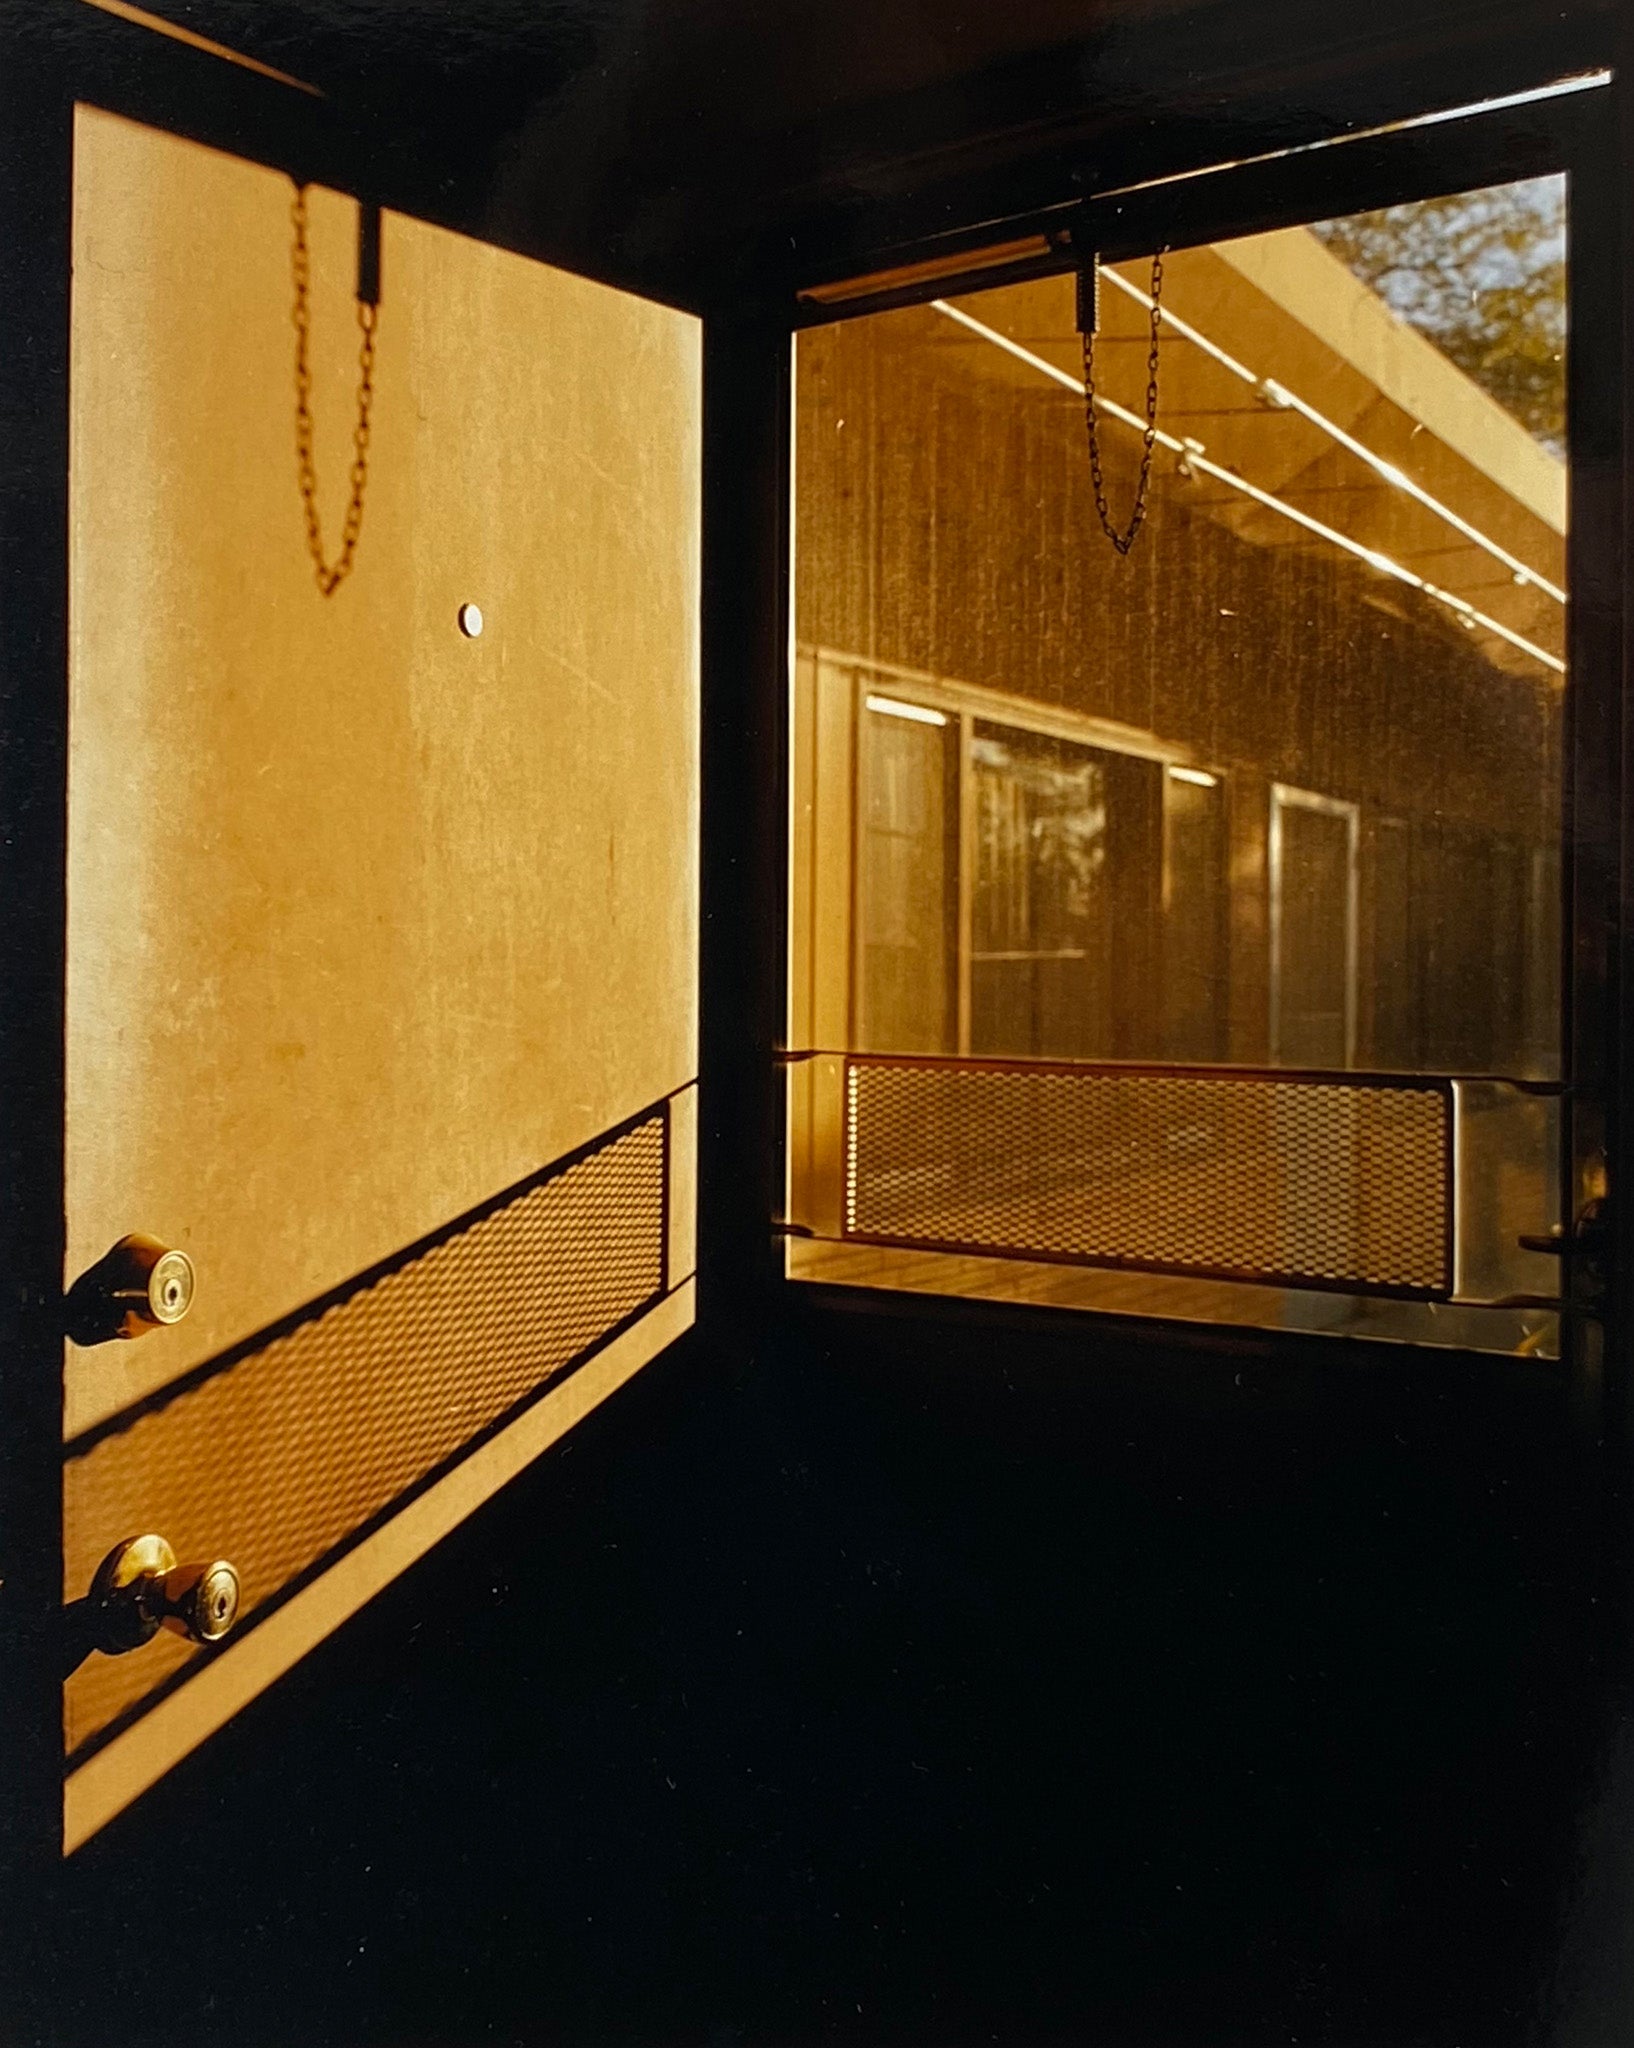 'Door - Lariat Motel' is a cinematic scene showing a doorway in the glowing evening light, with the setting sun casting shadows across the architecture. Richard Heeps photographed this artwork in Fallon, Nevada whilst on an American road trip. This artwork is part of Richard's 'Dream in Colour' series. 